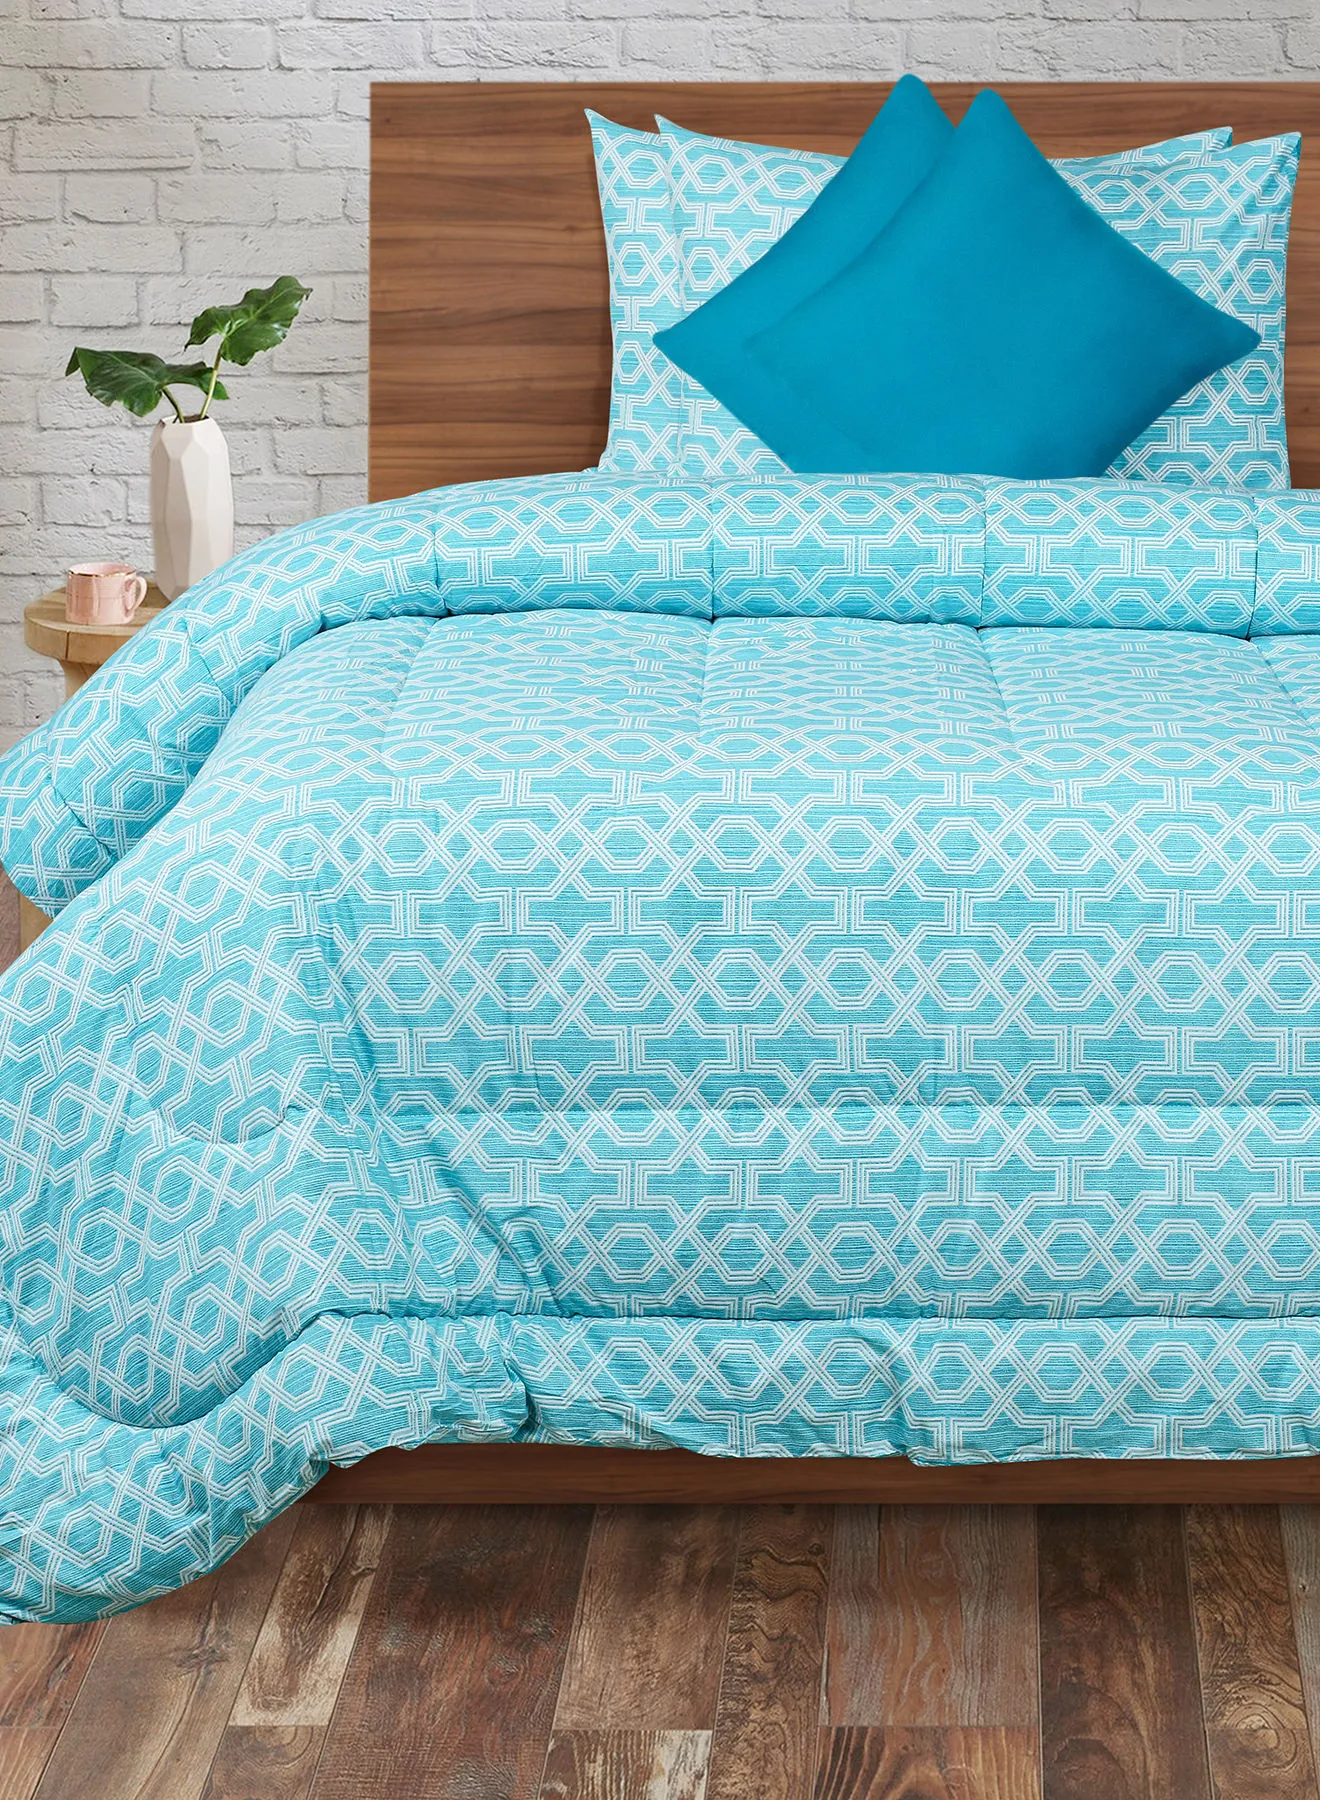 Amal Comforter Set King Size All Season Everyday Use Bedding Set 100% Cotton 5 Pieces 1 Comforter 2 Pillow Covers 2 Cushion Covers Teal/White